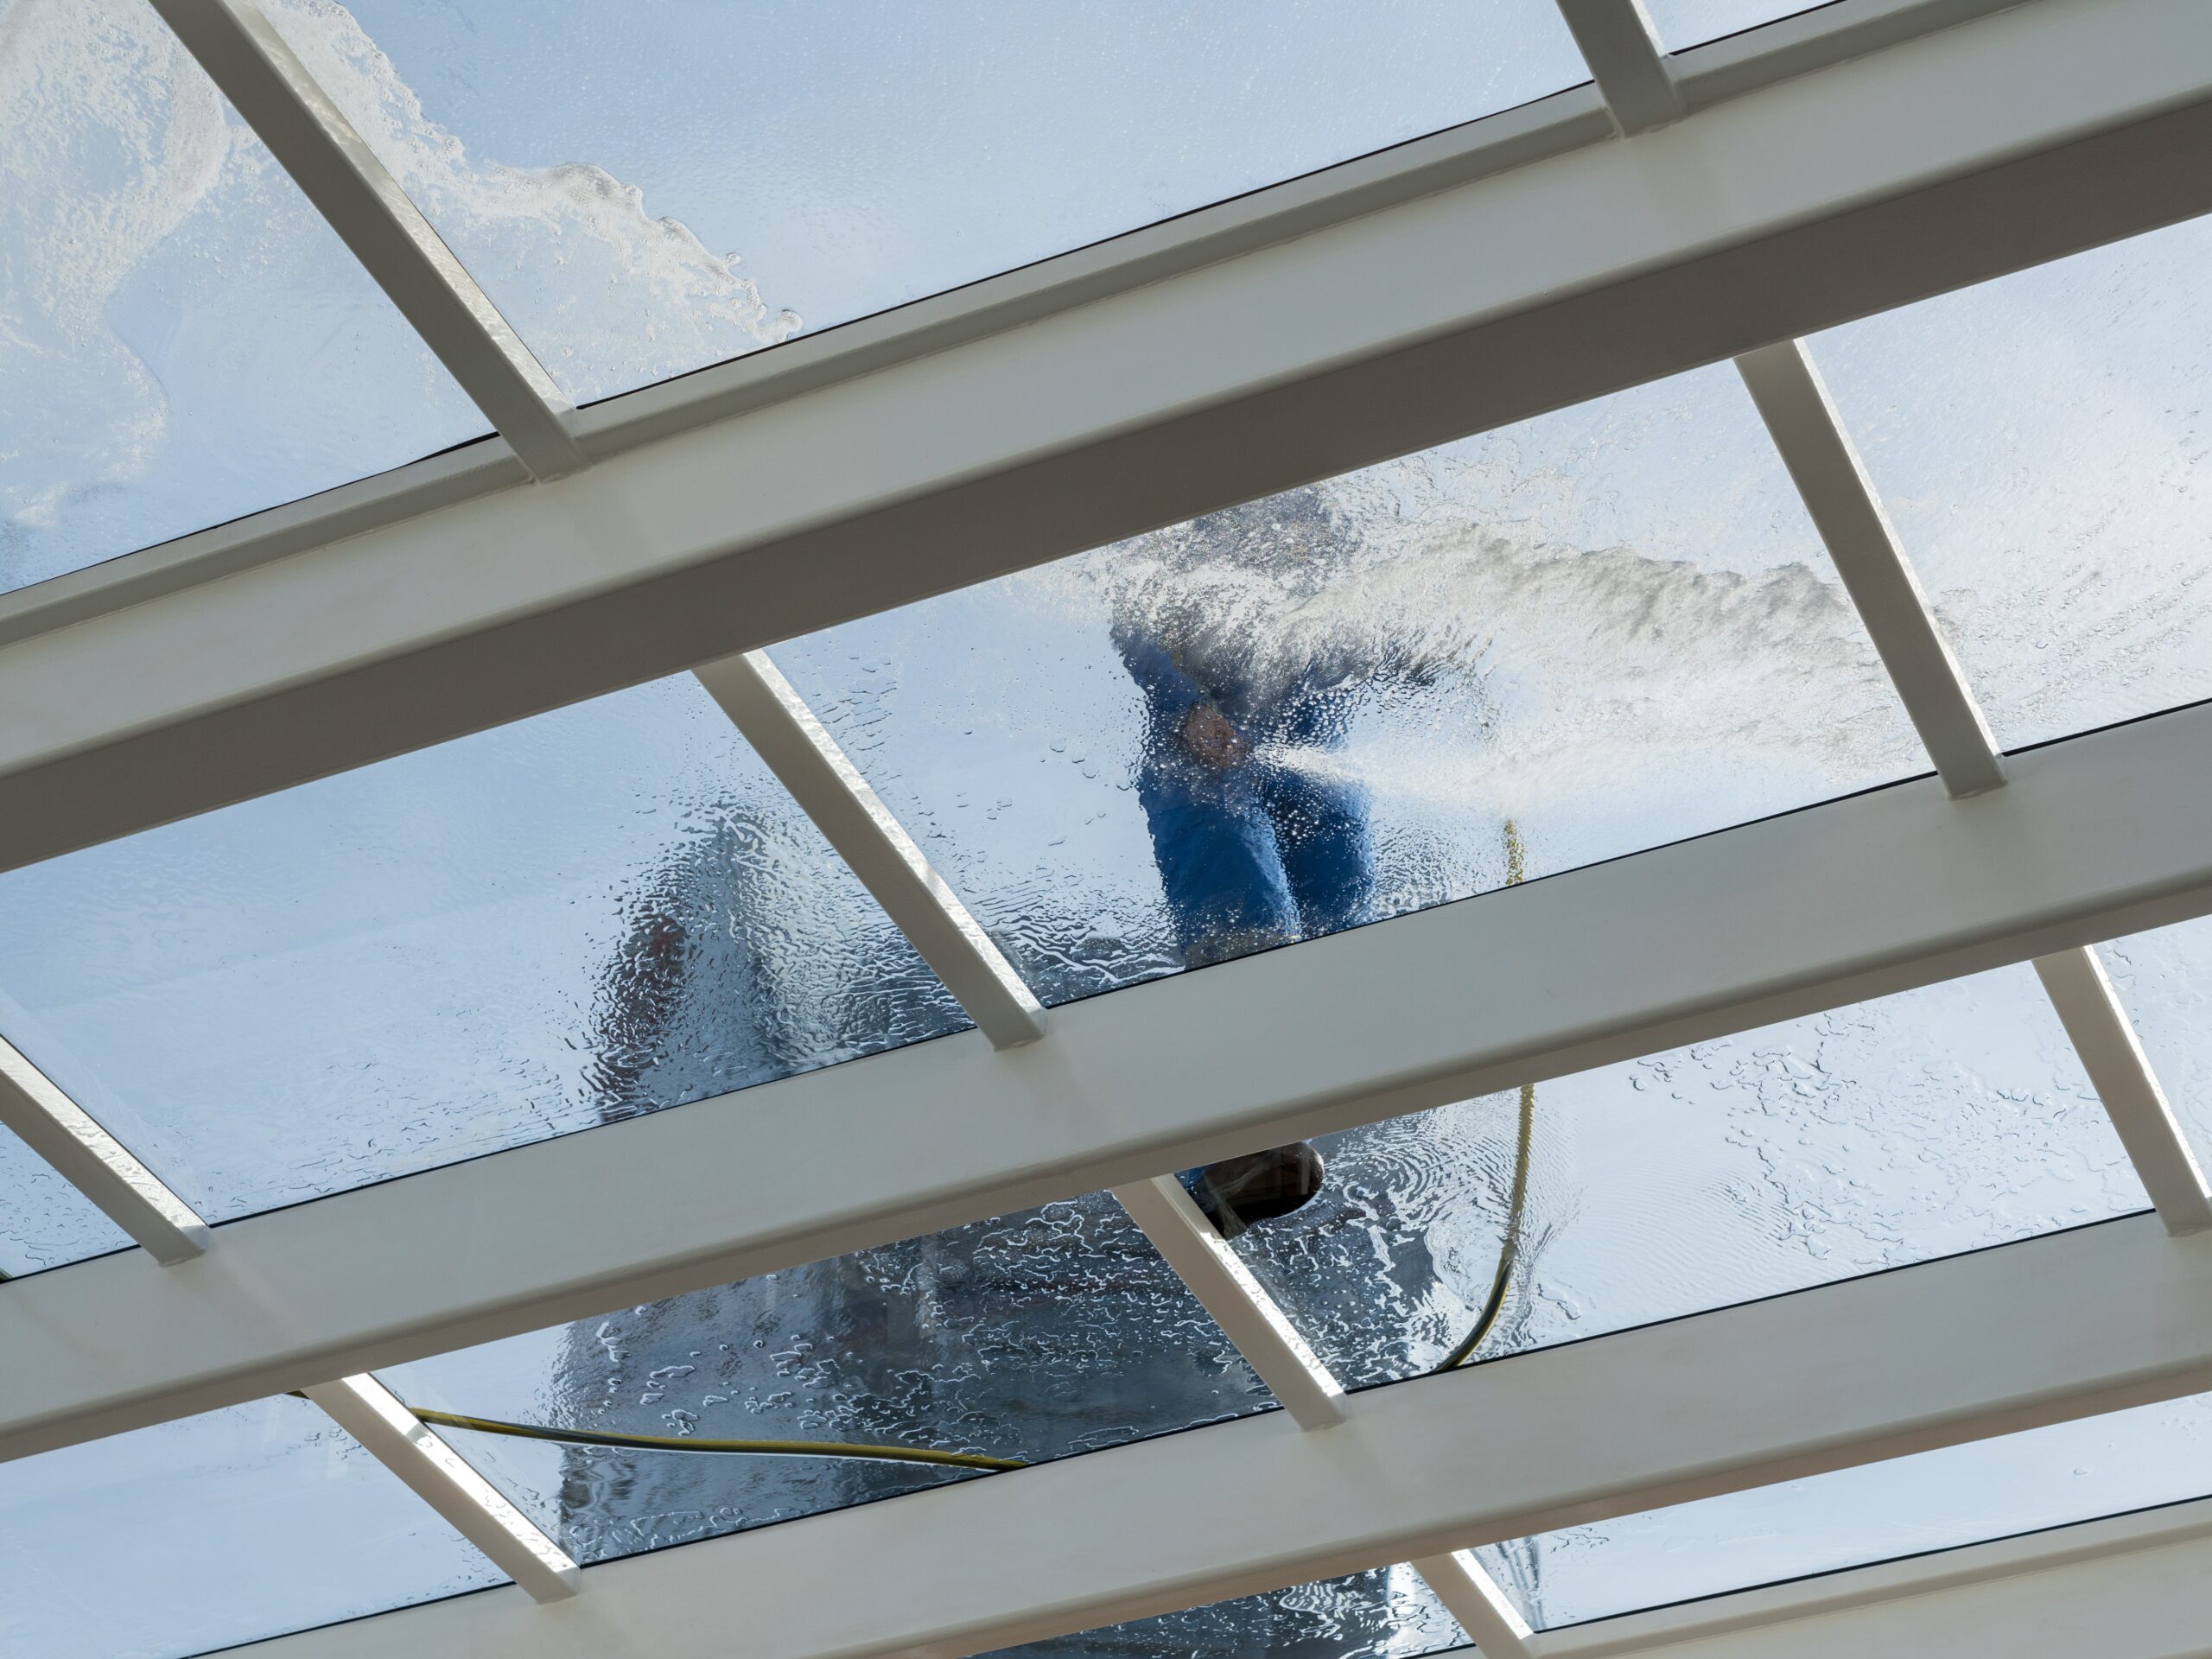 Male worker washing large expanse of glass roof over swimming pool with hose pipe